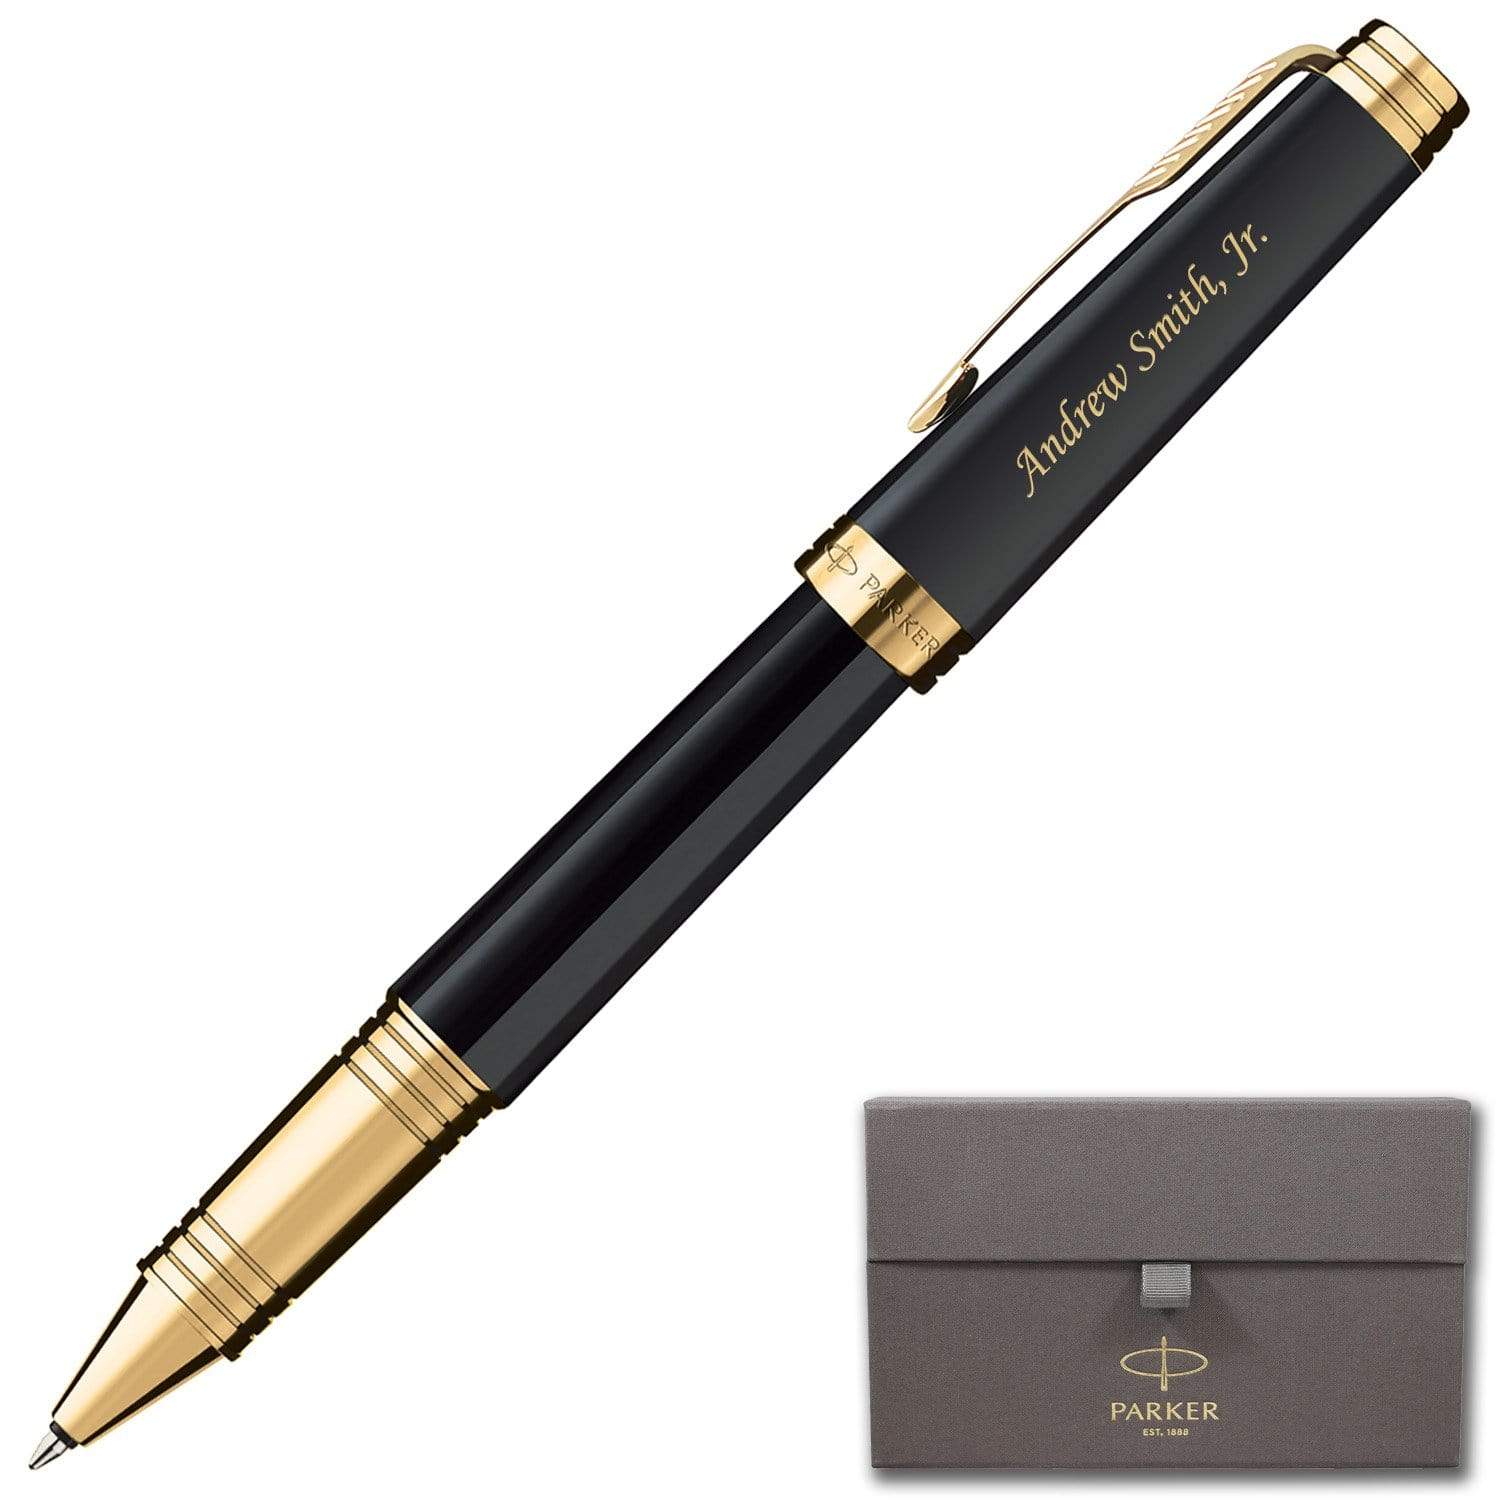 MESMOS 3Pk Luxury Fancy Pen Set, Birthday Gifts for Dad, Gifts for Fathers  Day from Daughter